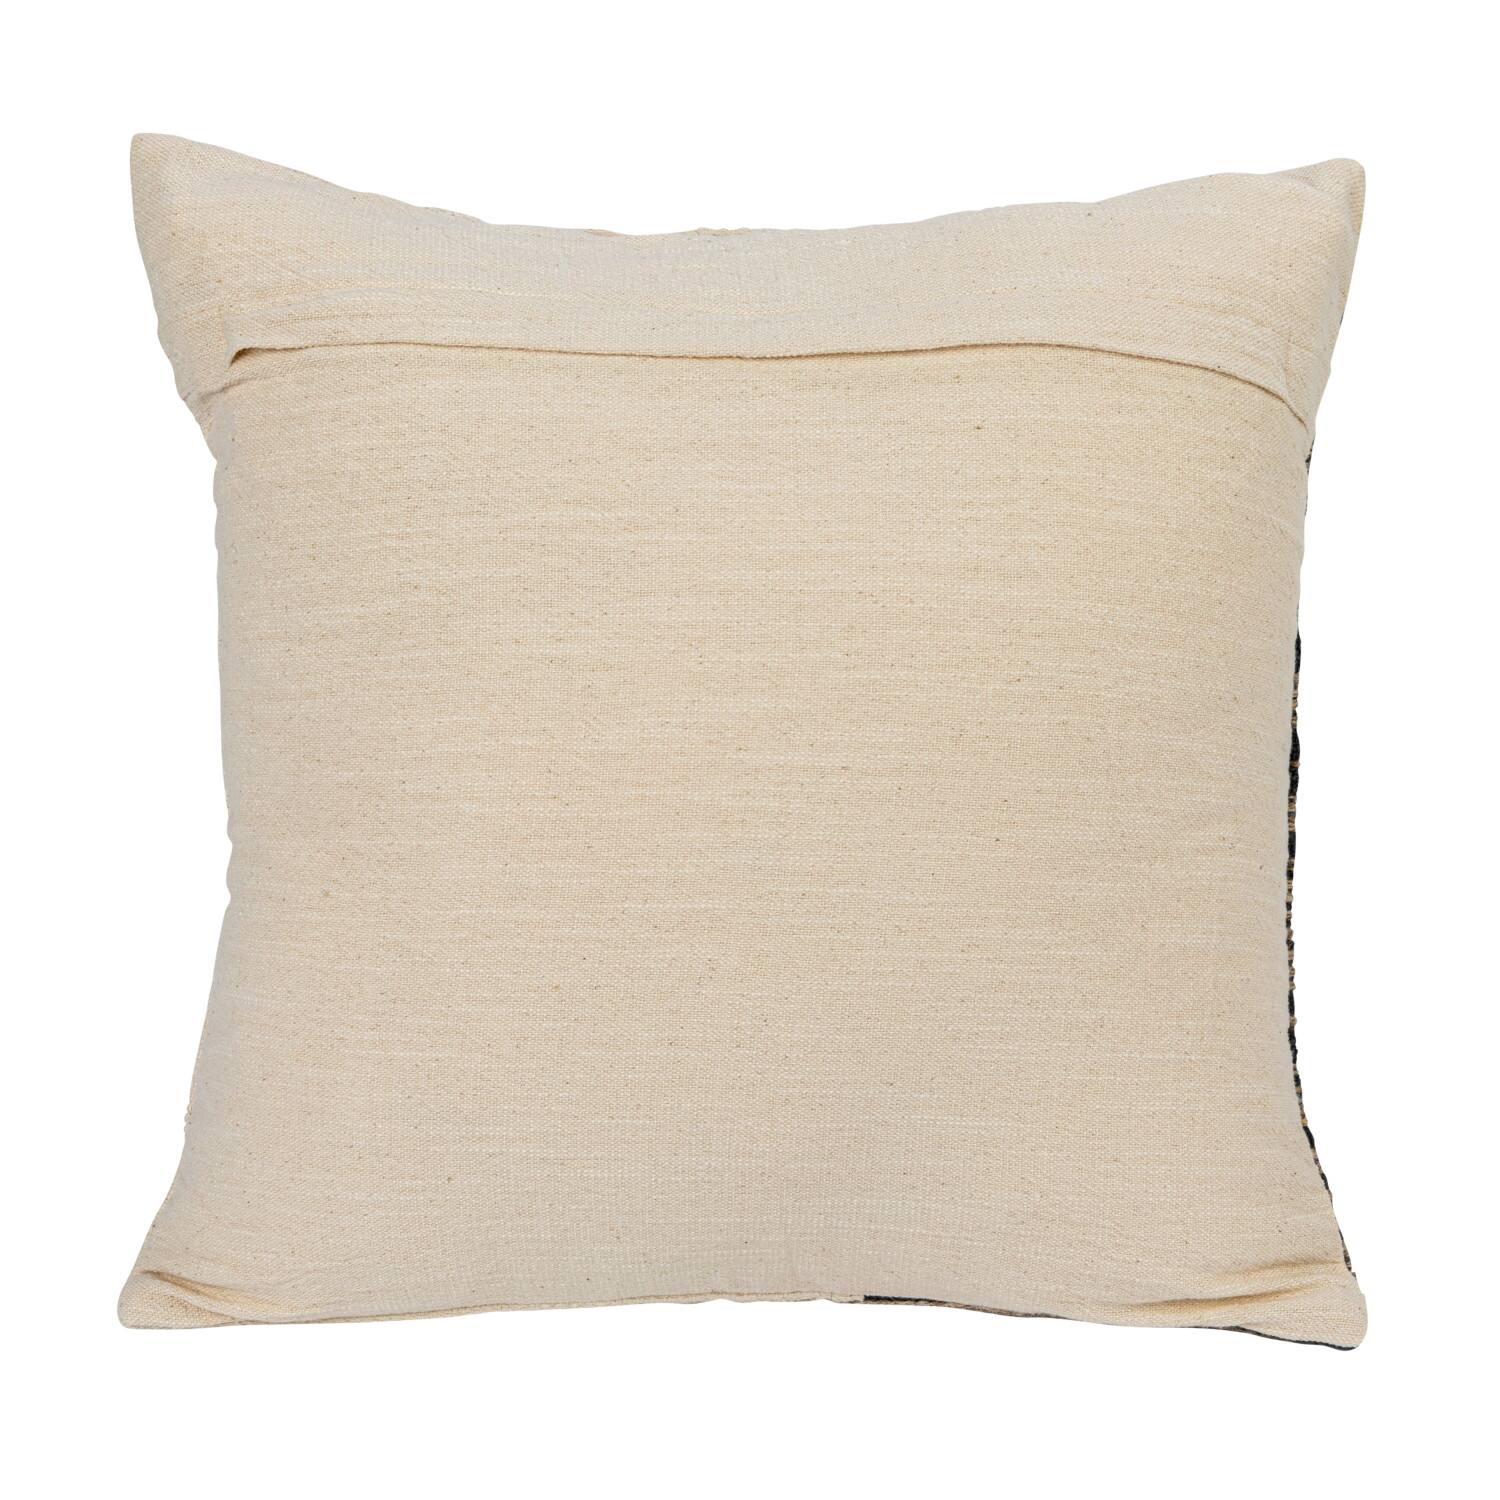 Multicolor Cotton Jacquard Pillow with Jute Embroidery